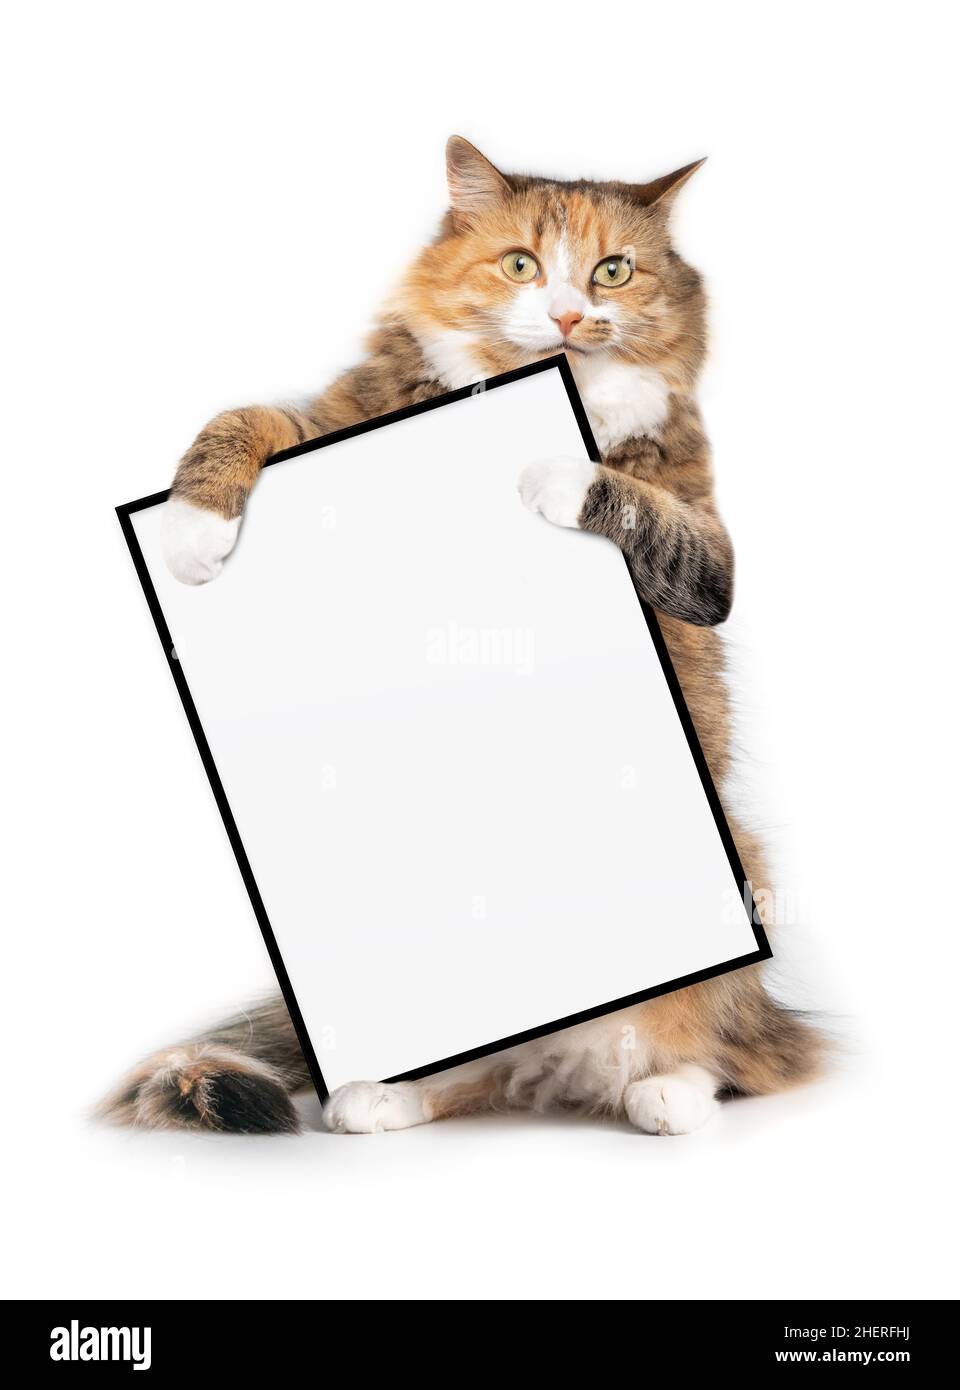 Isolated cat holding a blank sign with paws while standing upright and looking at camera. Adorable fluffy orange white calico cat is sitting on hind l Stock Photo